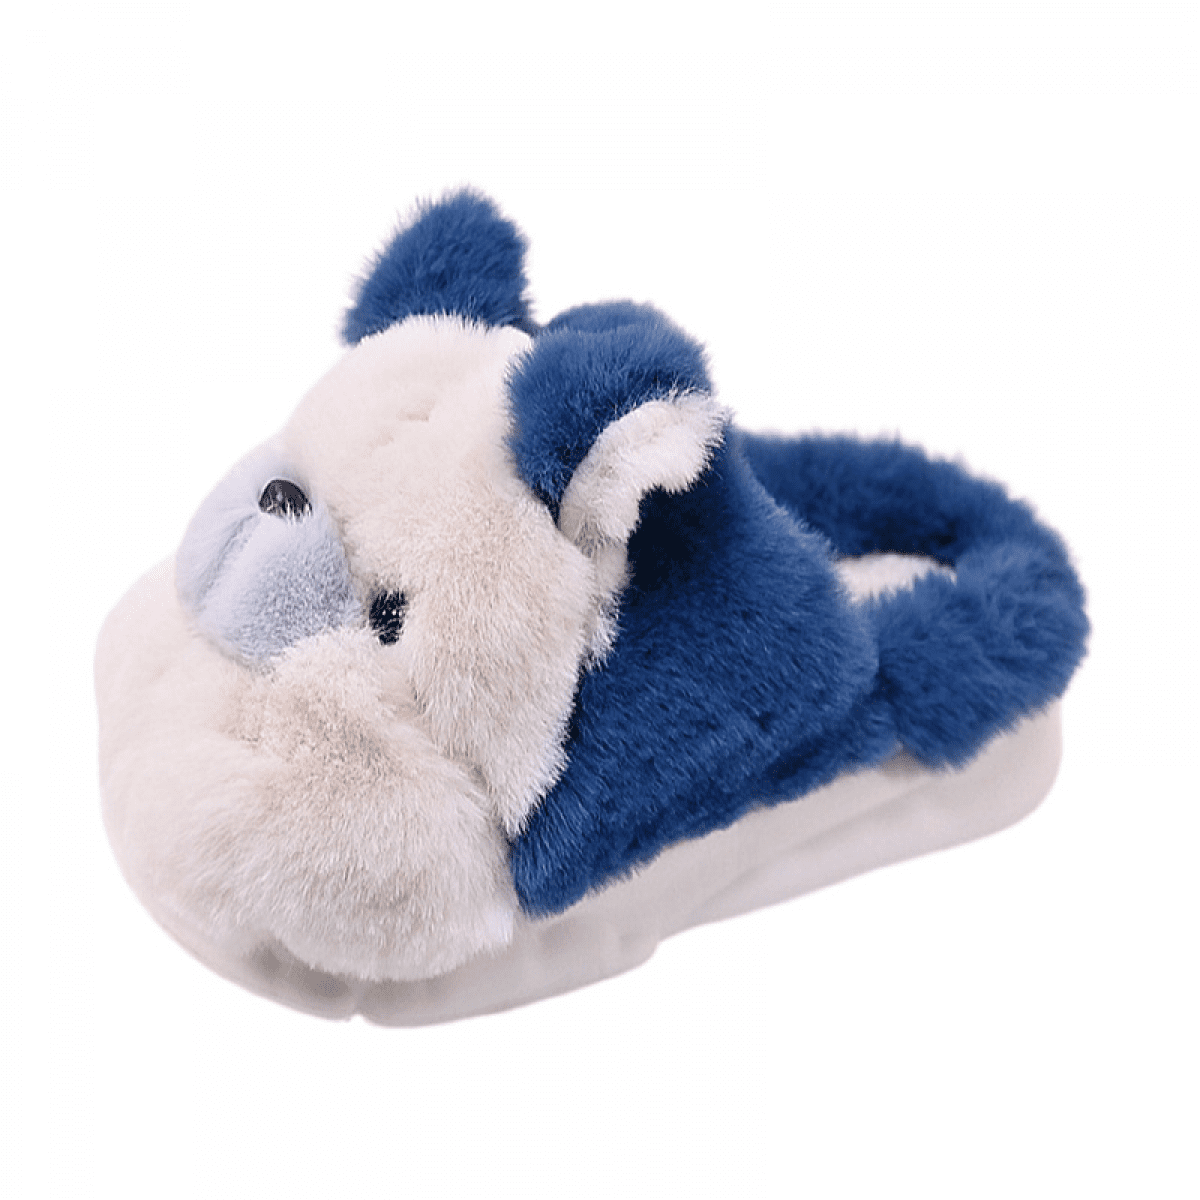 Adult Cotton Slippers Slippers Home Slippers Plush Slippers Animal ...